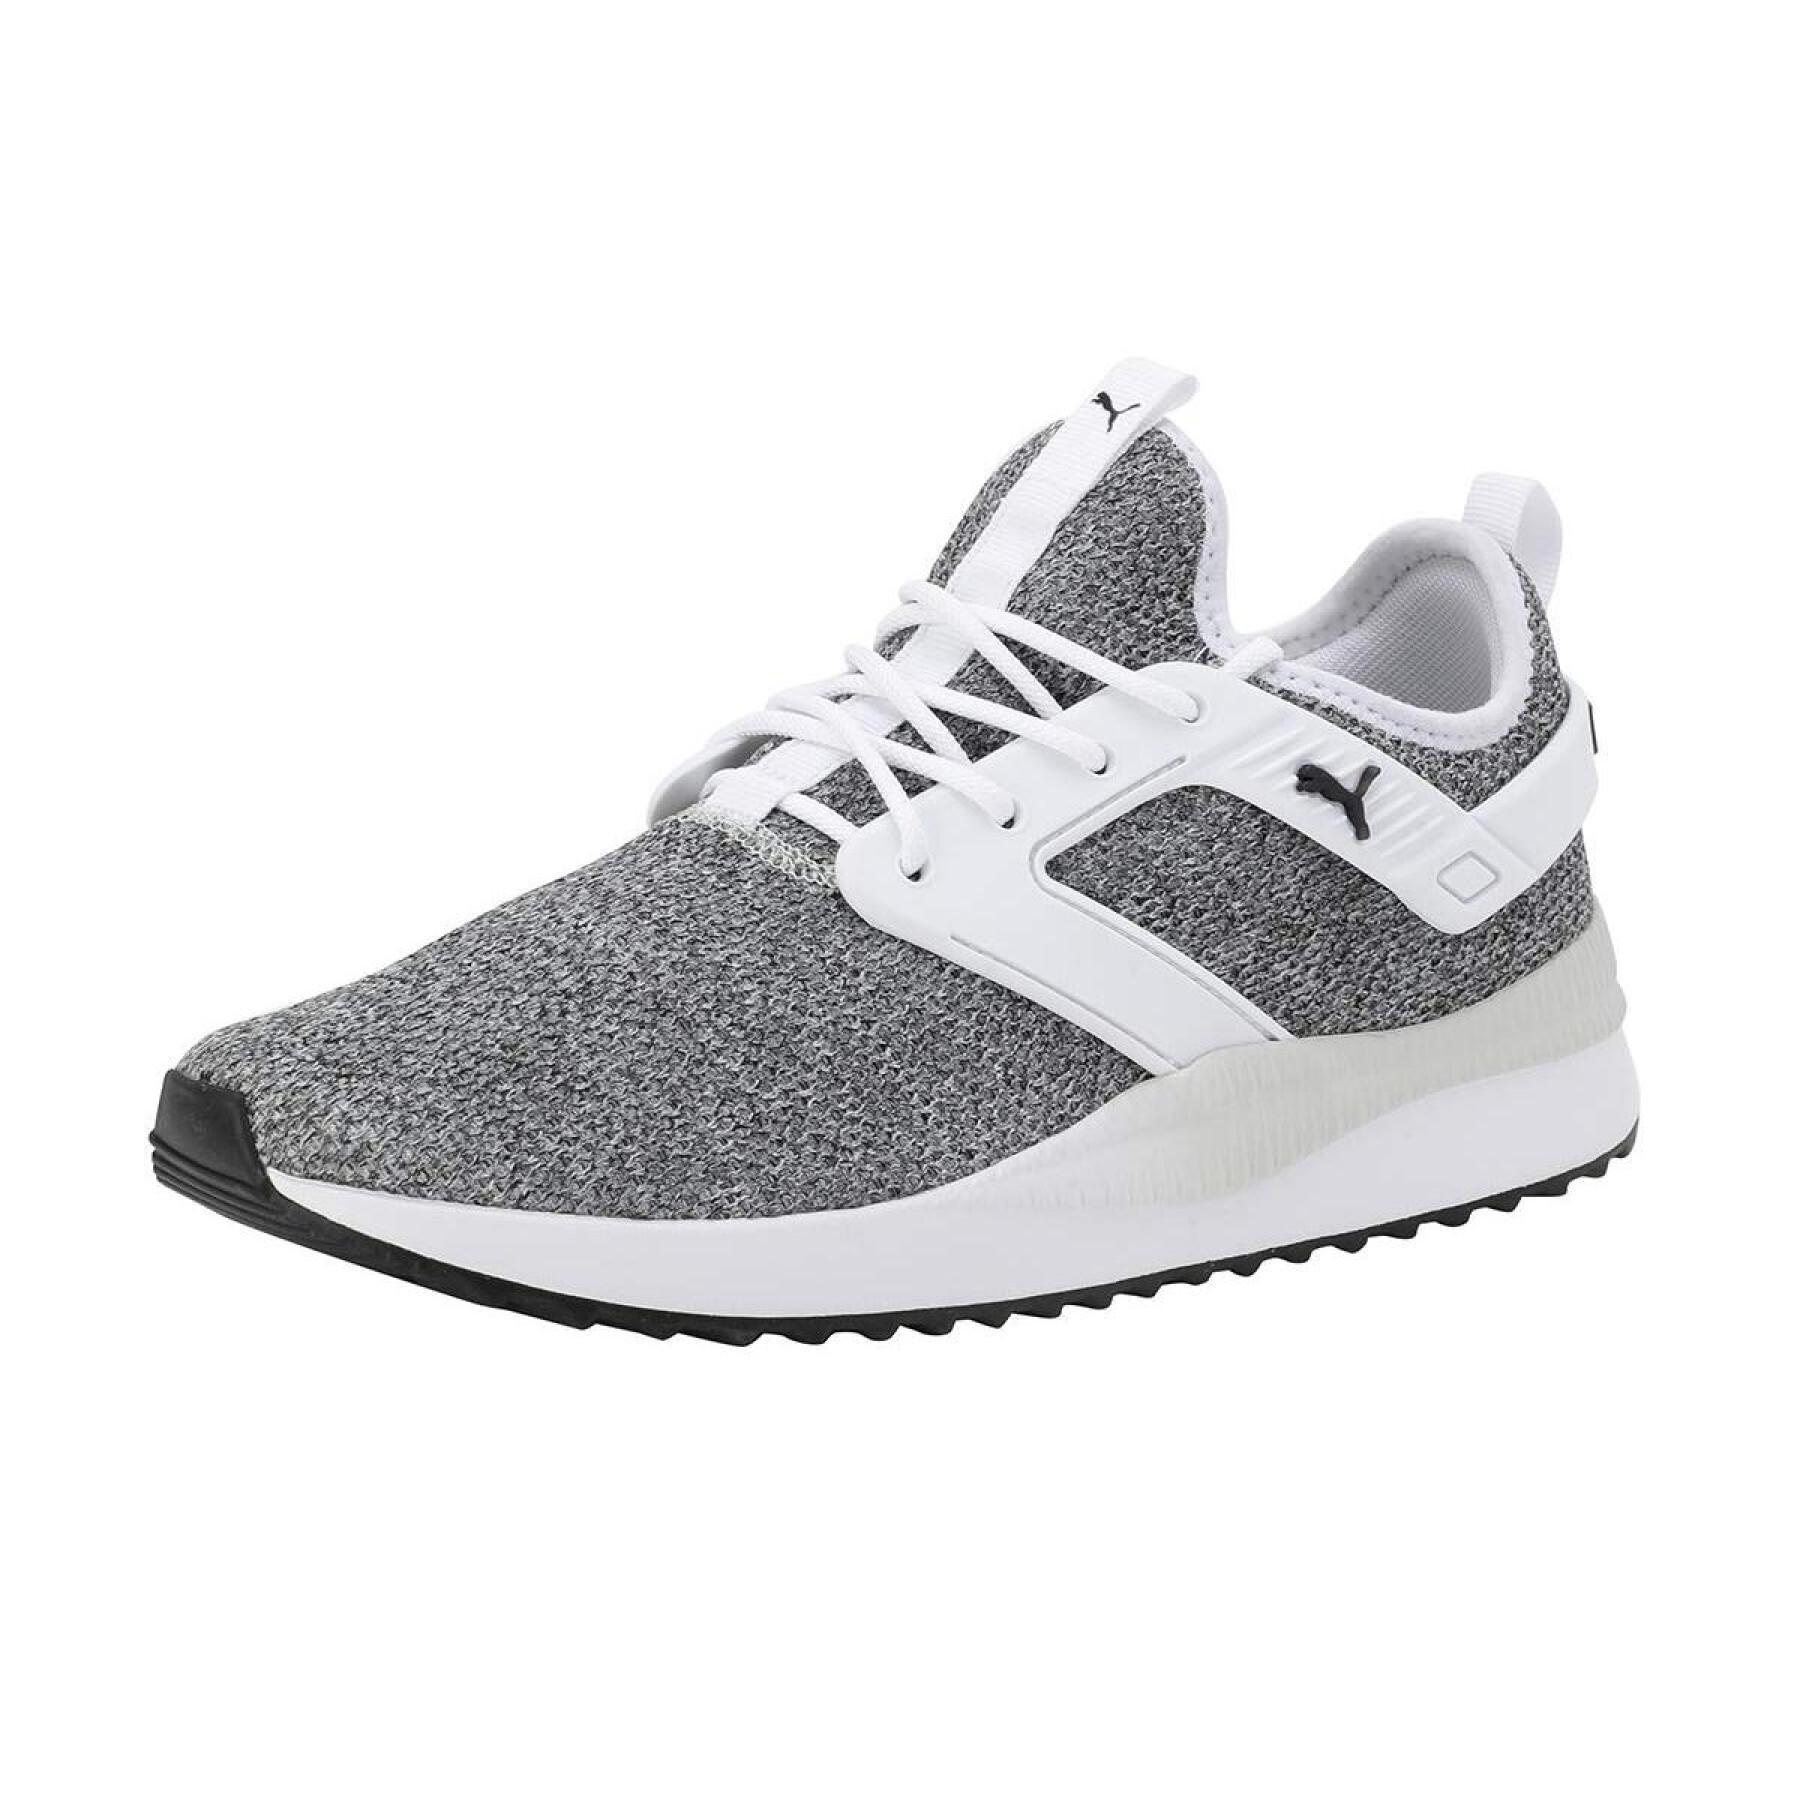 Buty Puma Pacer next excel vknit